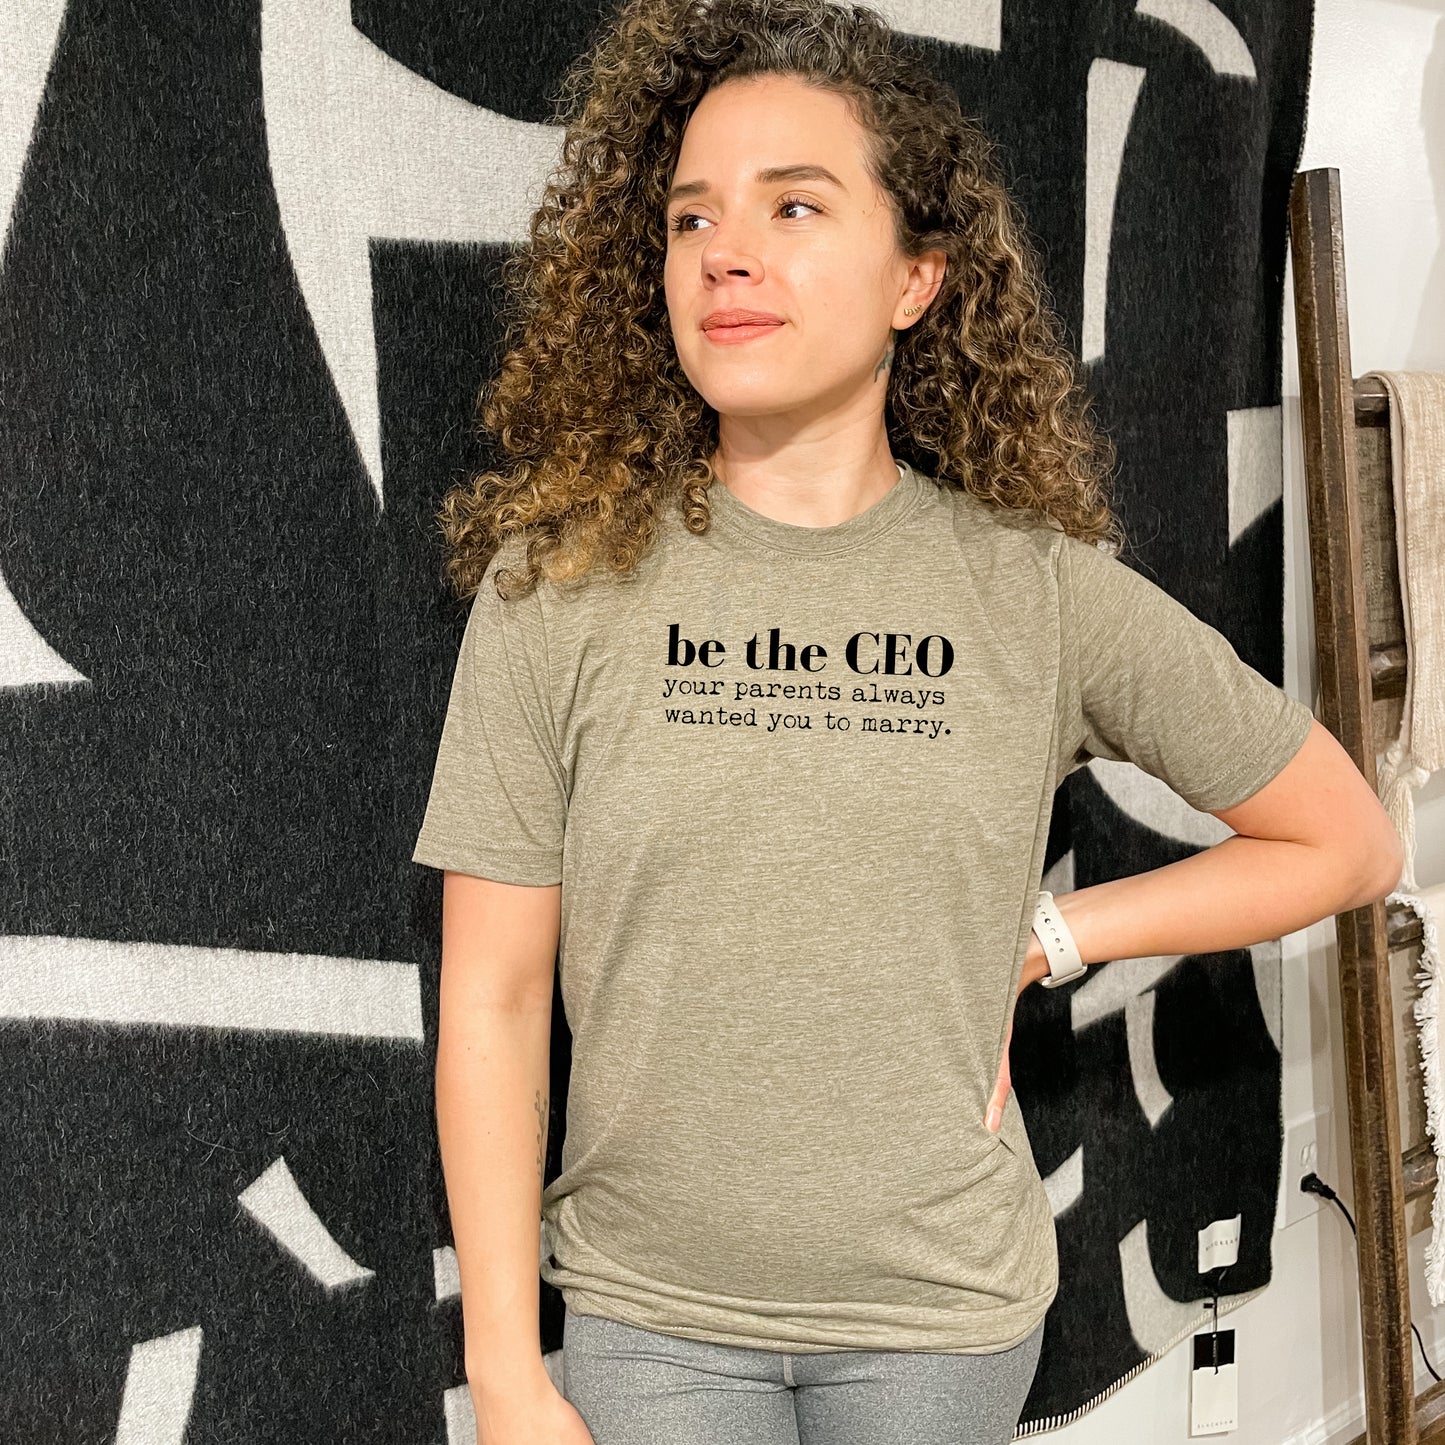 Be The CEO Your Parents Always Wanted You To Marry - Men's / Unisex Tee - Stonewash Blue or Sage